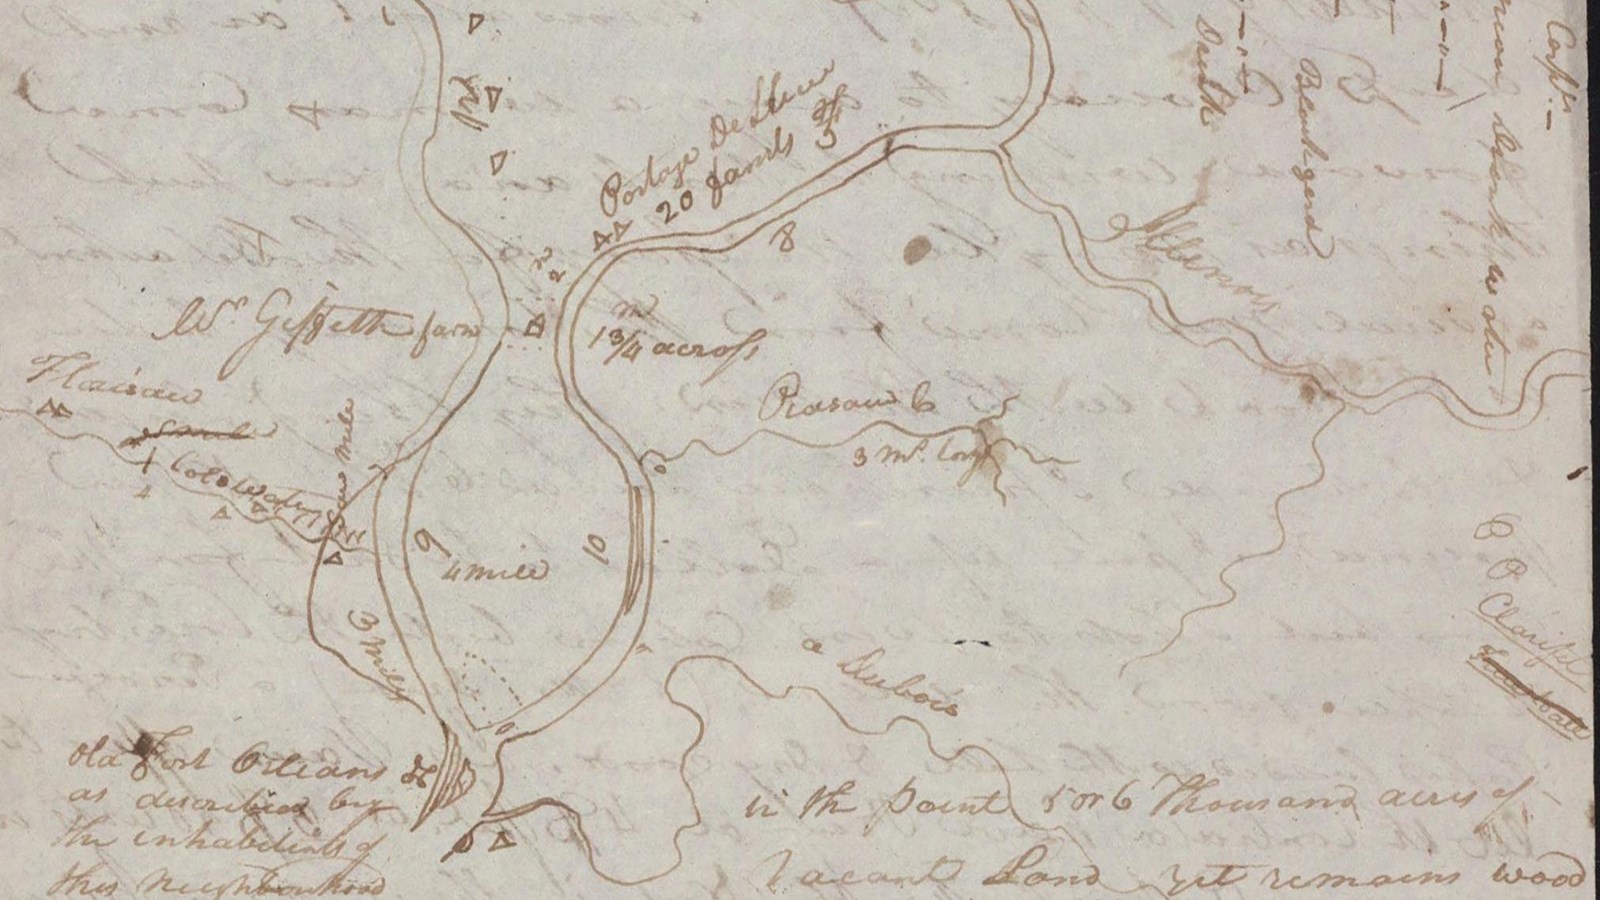 Hand drawn map showing the area surrounding Camp Dubois.